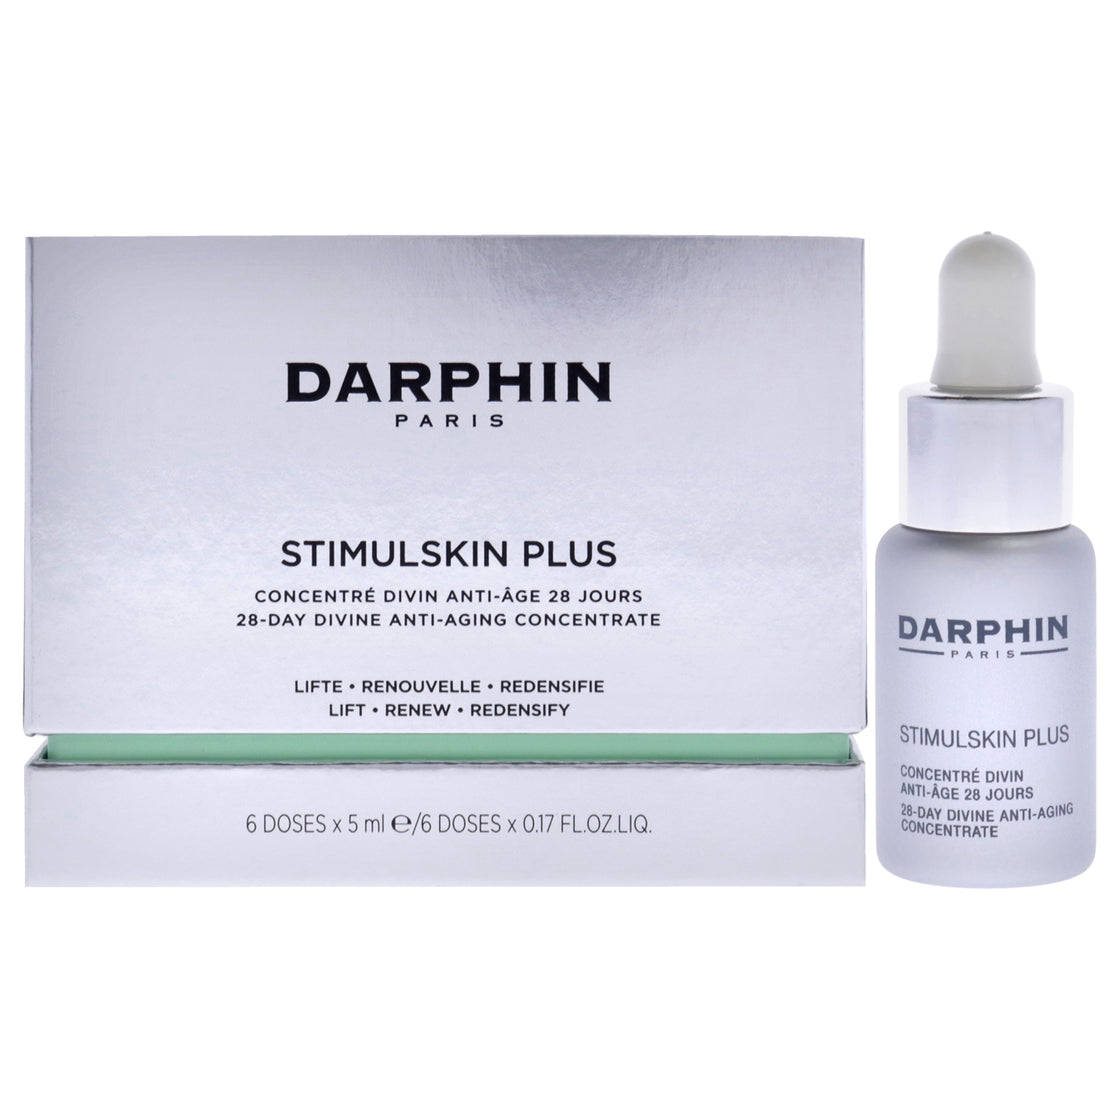 Stimulskin Plus 28-Day Divine Anti-Aging Concentrate by Darphin for Women - 6 x 0.17 oz Serum